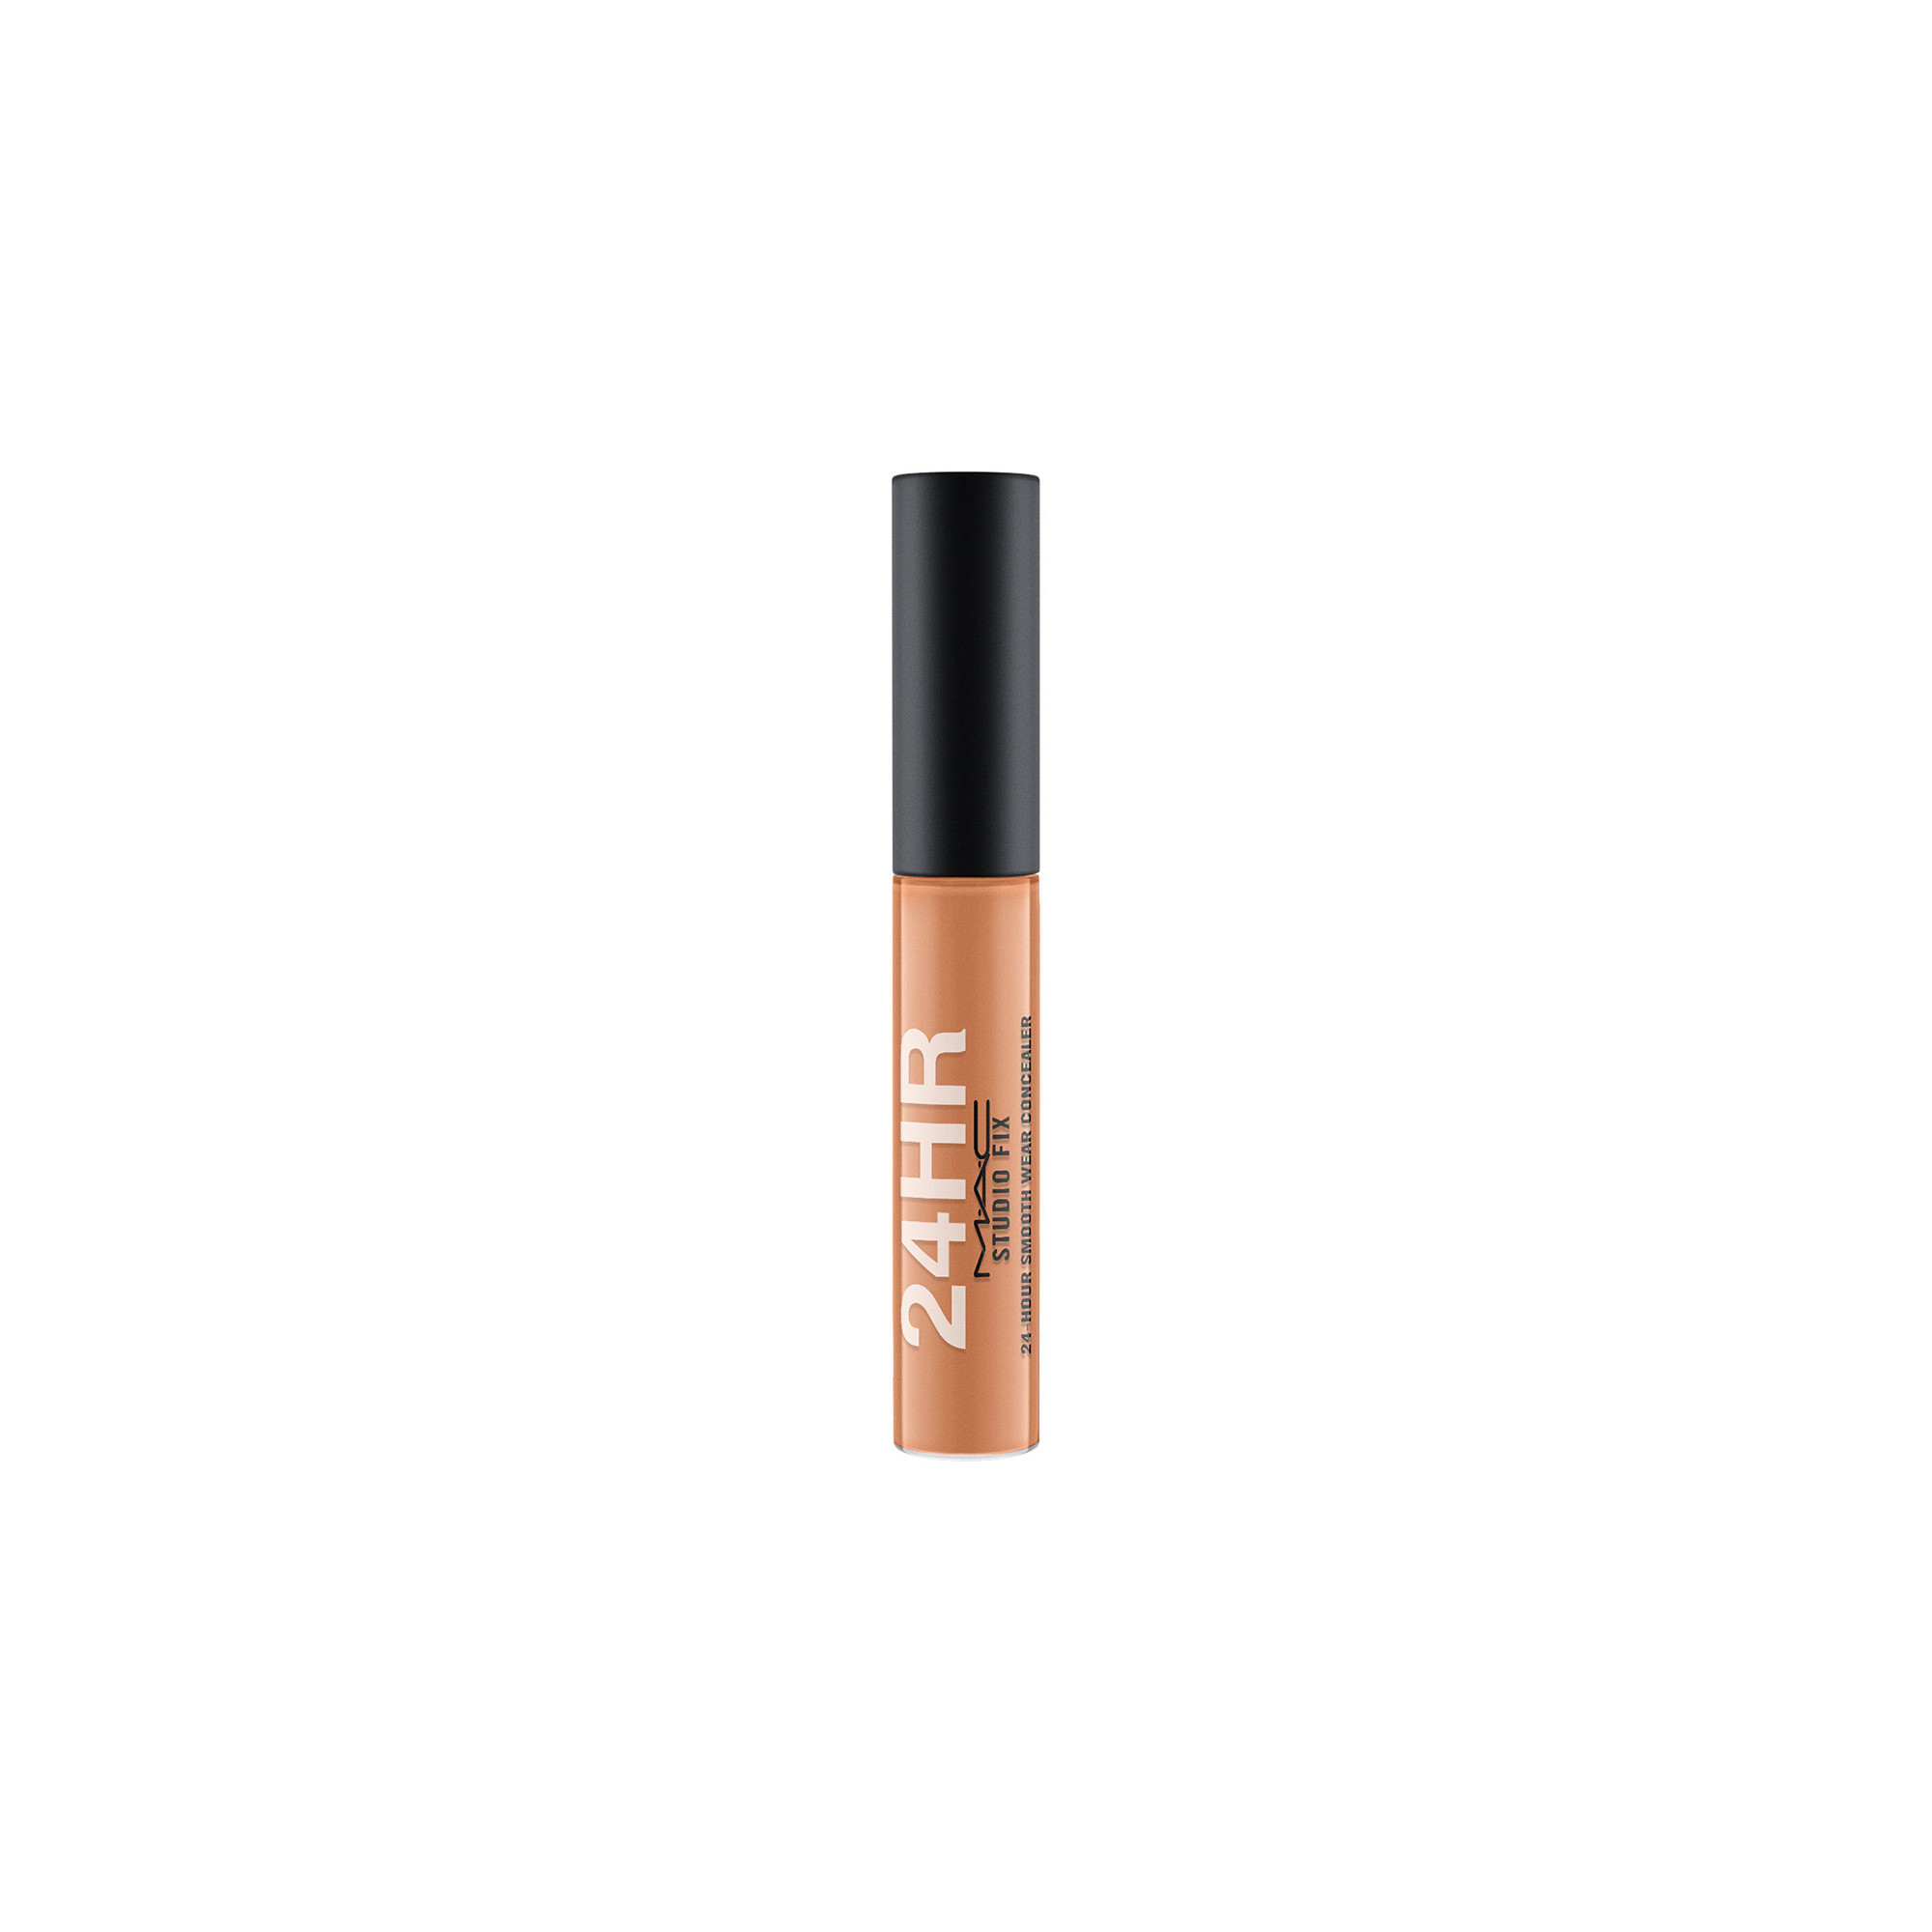 Studio Fix 24H Concealer - NW42, NW42, large